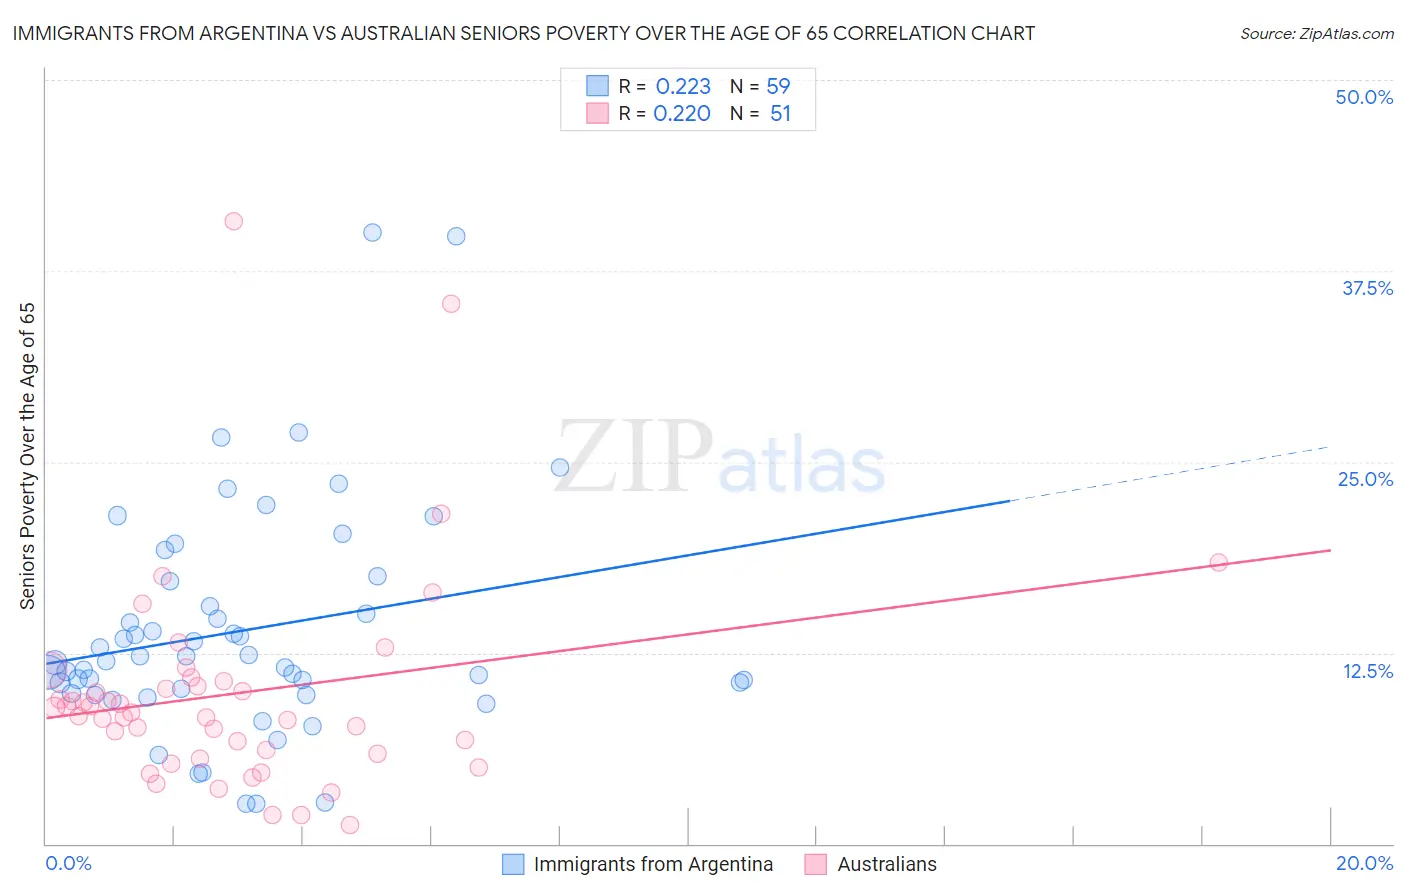 Immigrants from Argentina vs Australian Seniors Poverty Over the Age of 65